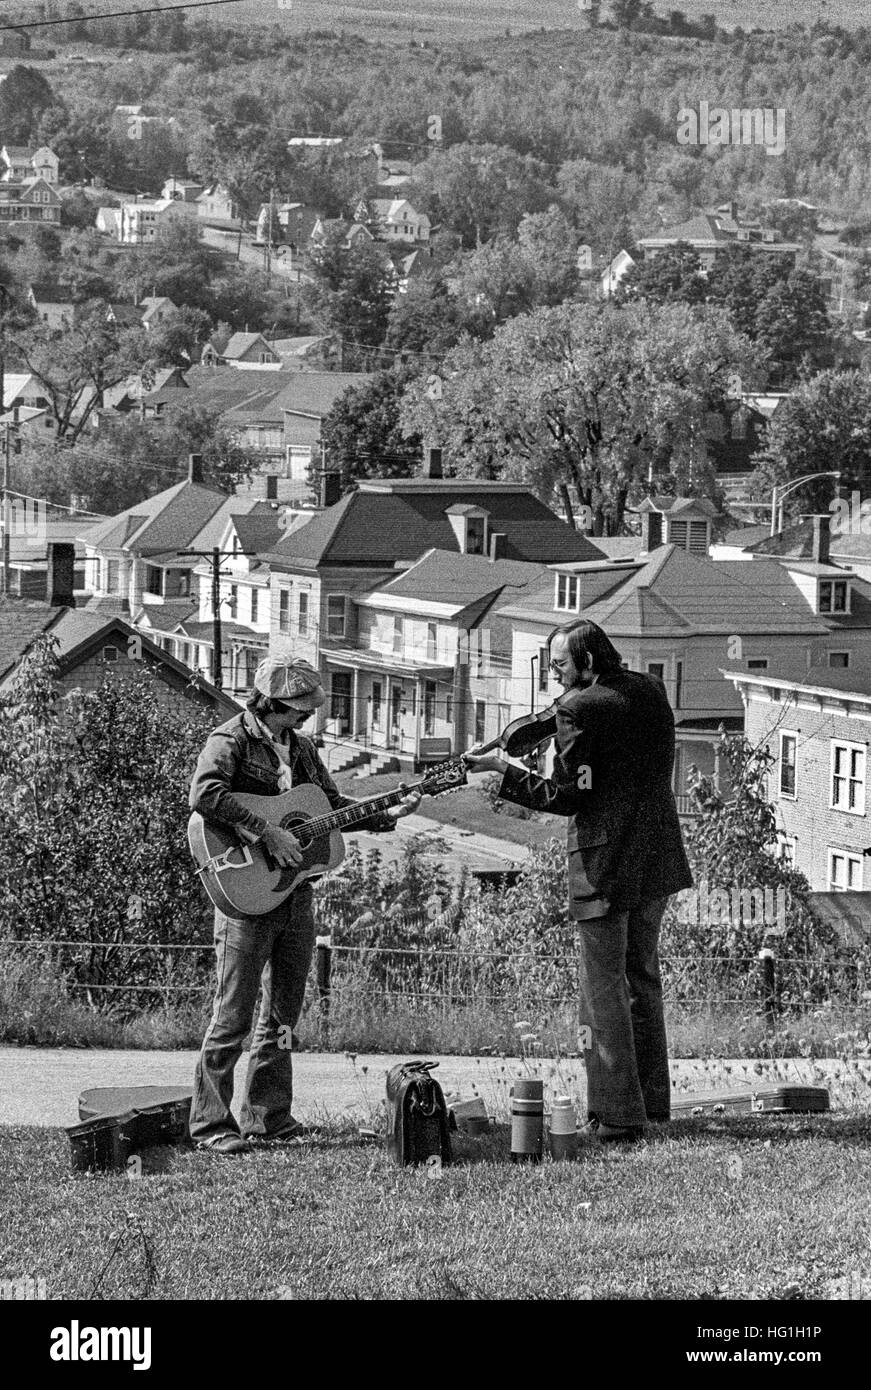 Playing guitar and violin, two musicians practice on a Vermont hillside at a folk music festival and contest. Note homes in background. Stock Photo